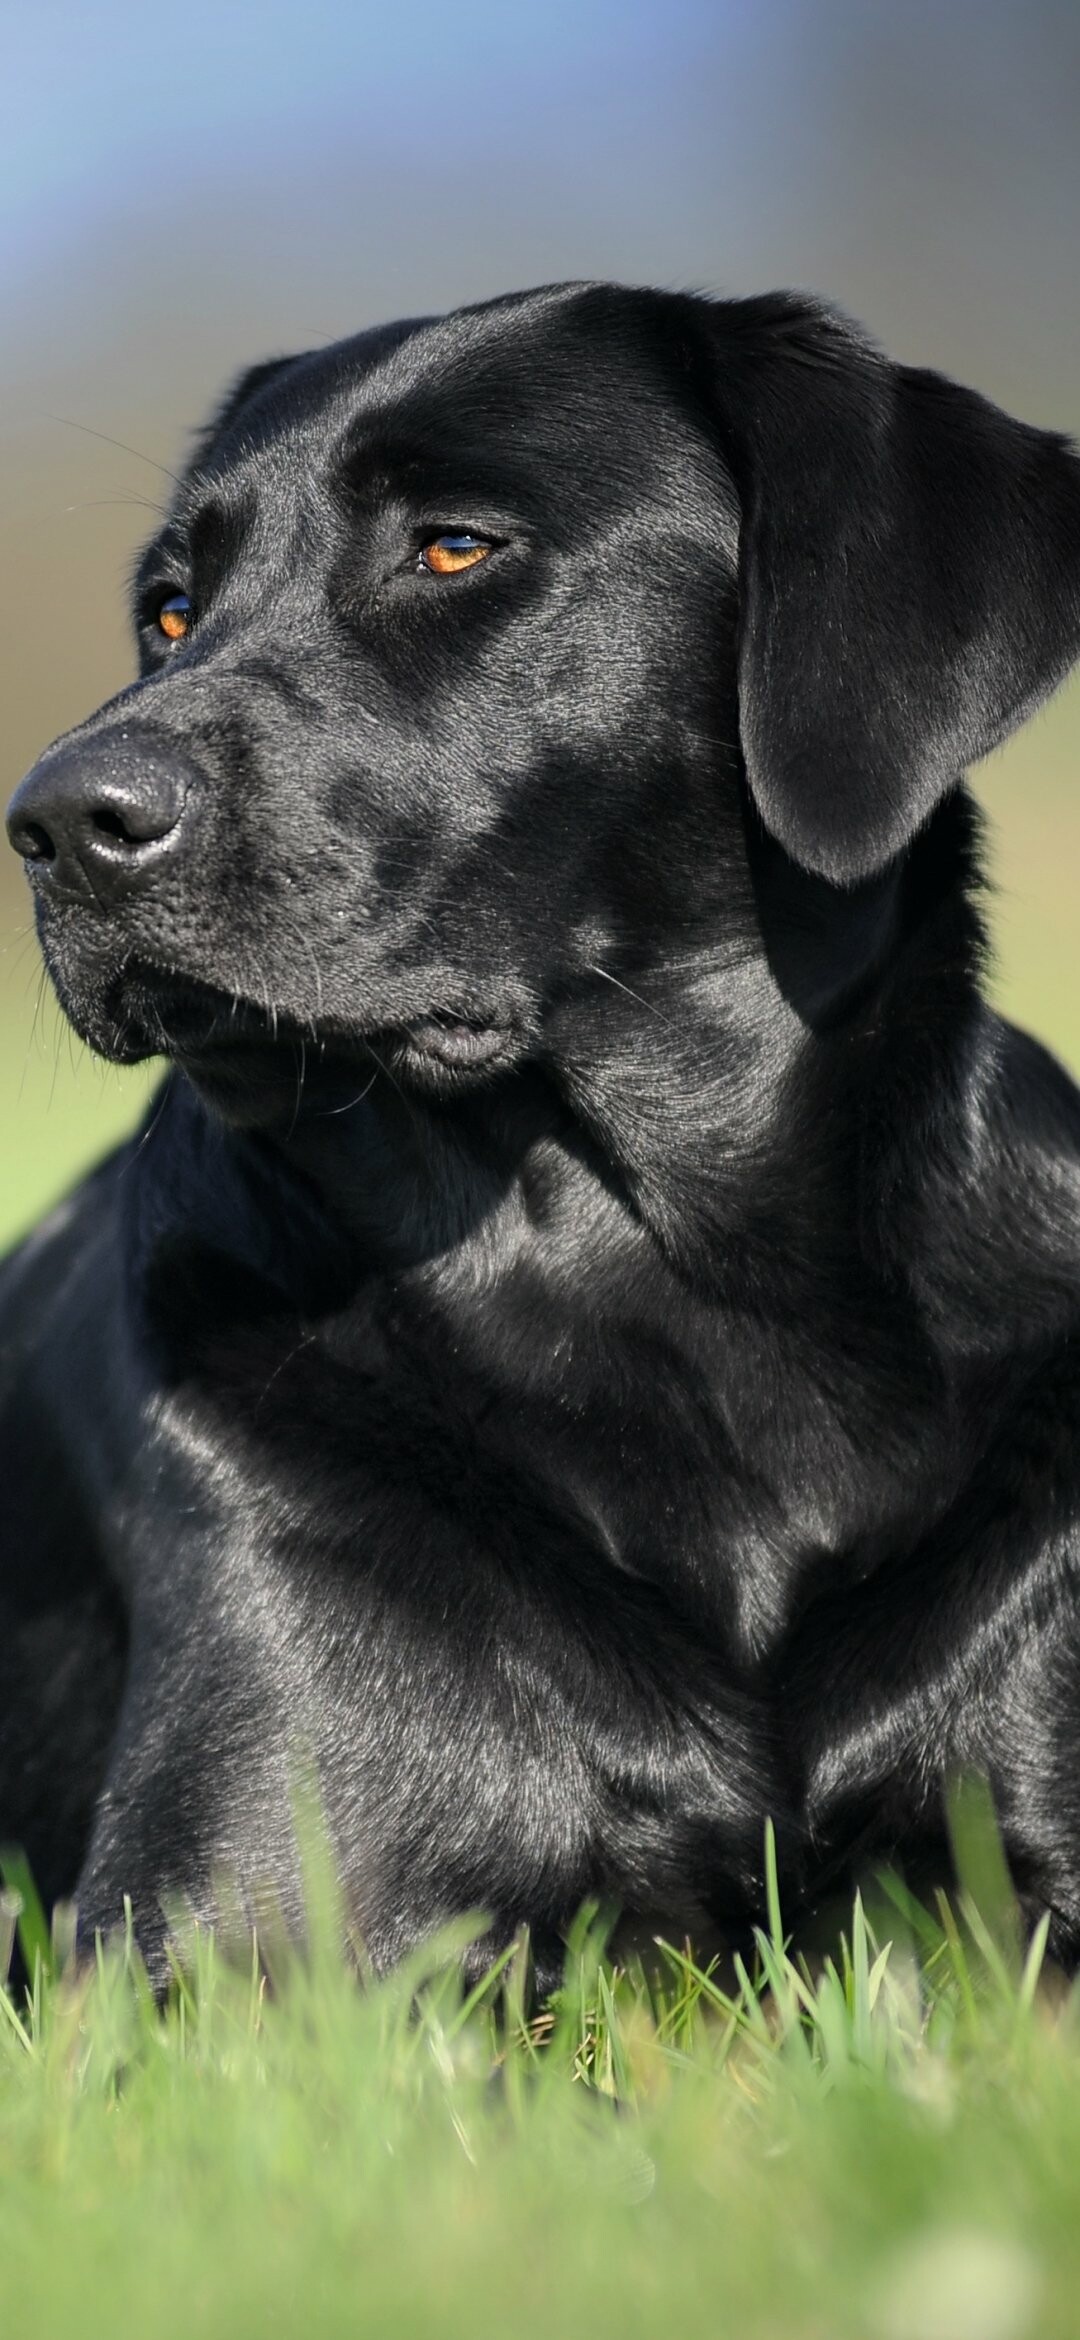 Labrador Retriever: Frequently trained to aid those with blindness or autism and act as a therapy dog. 1080x2340 HD Background.